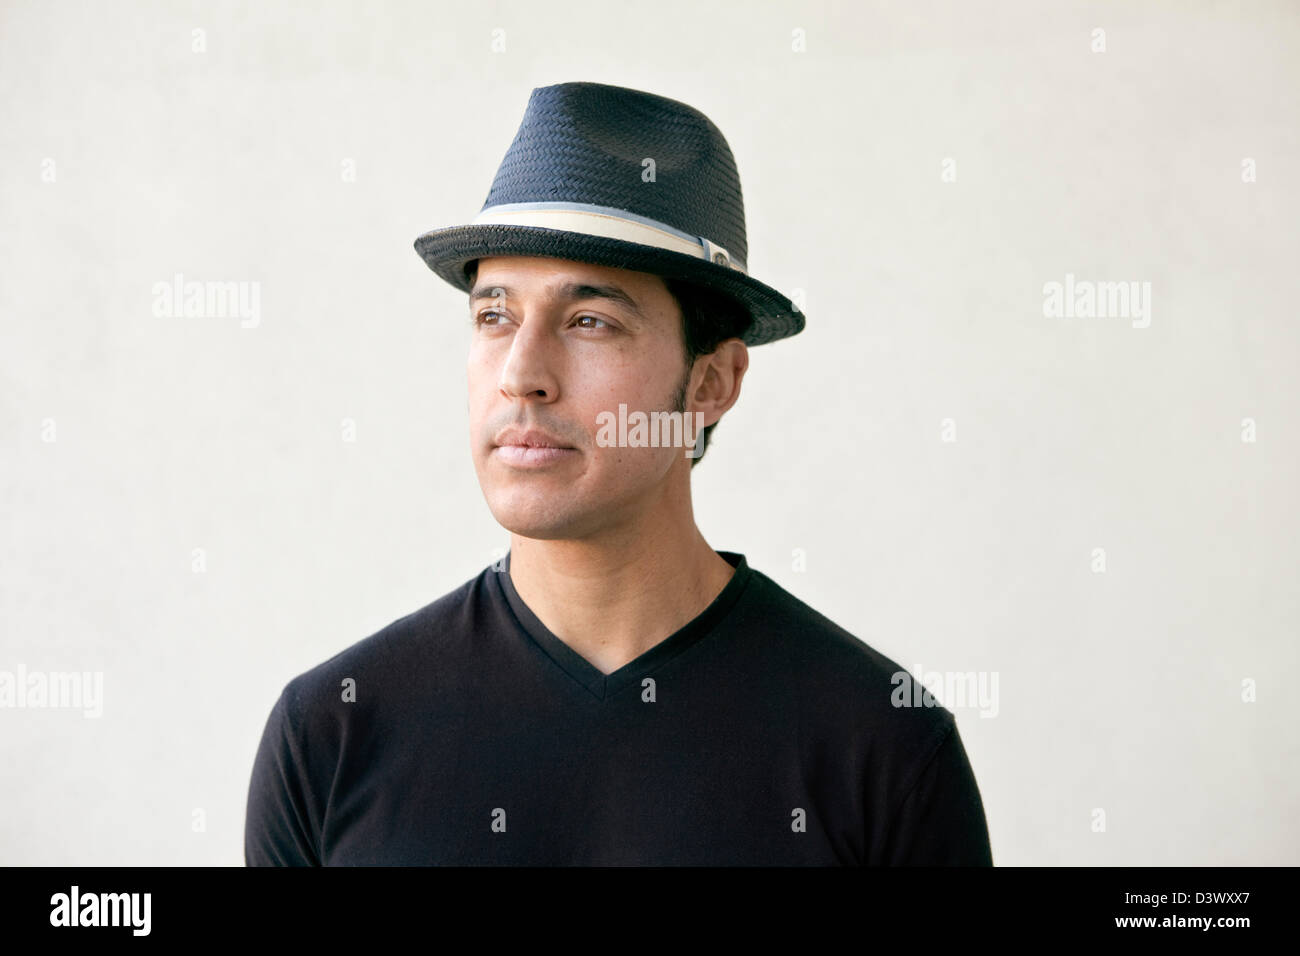 Portrait of young adult mexican-american male with a hat Stock Photo